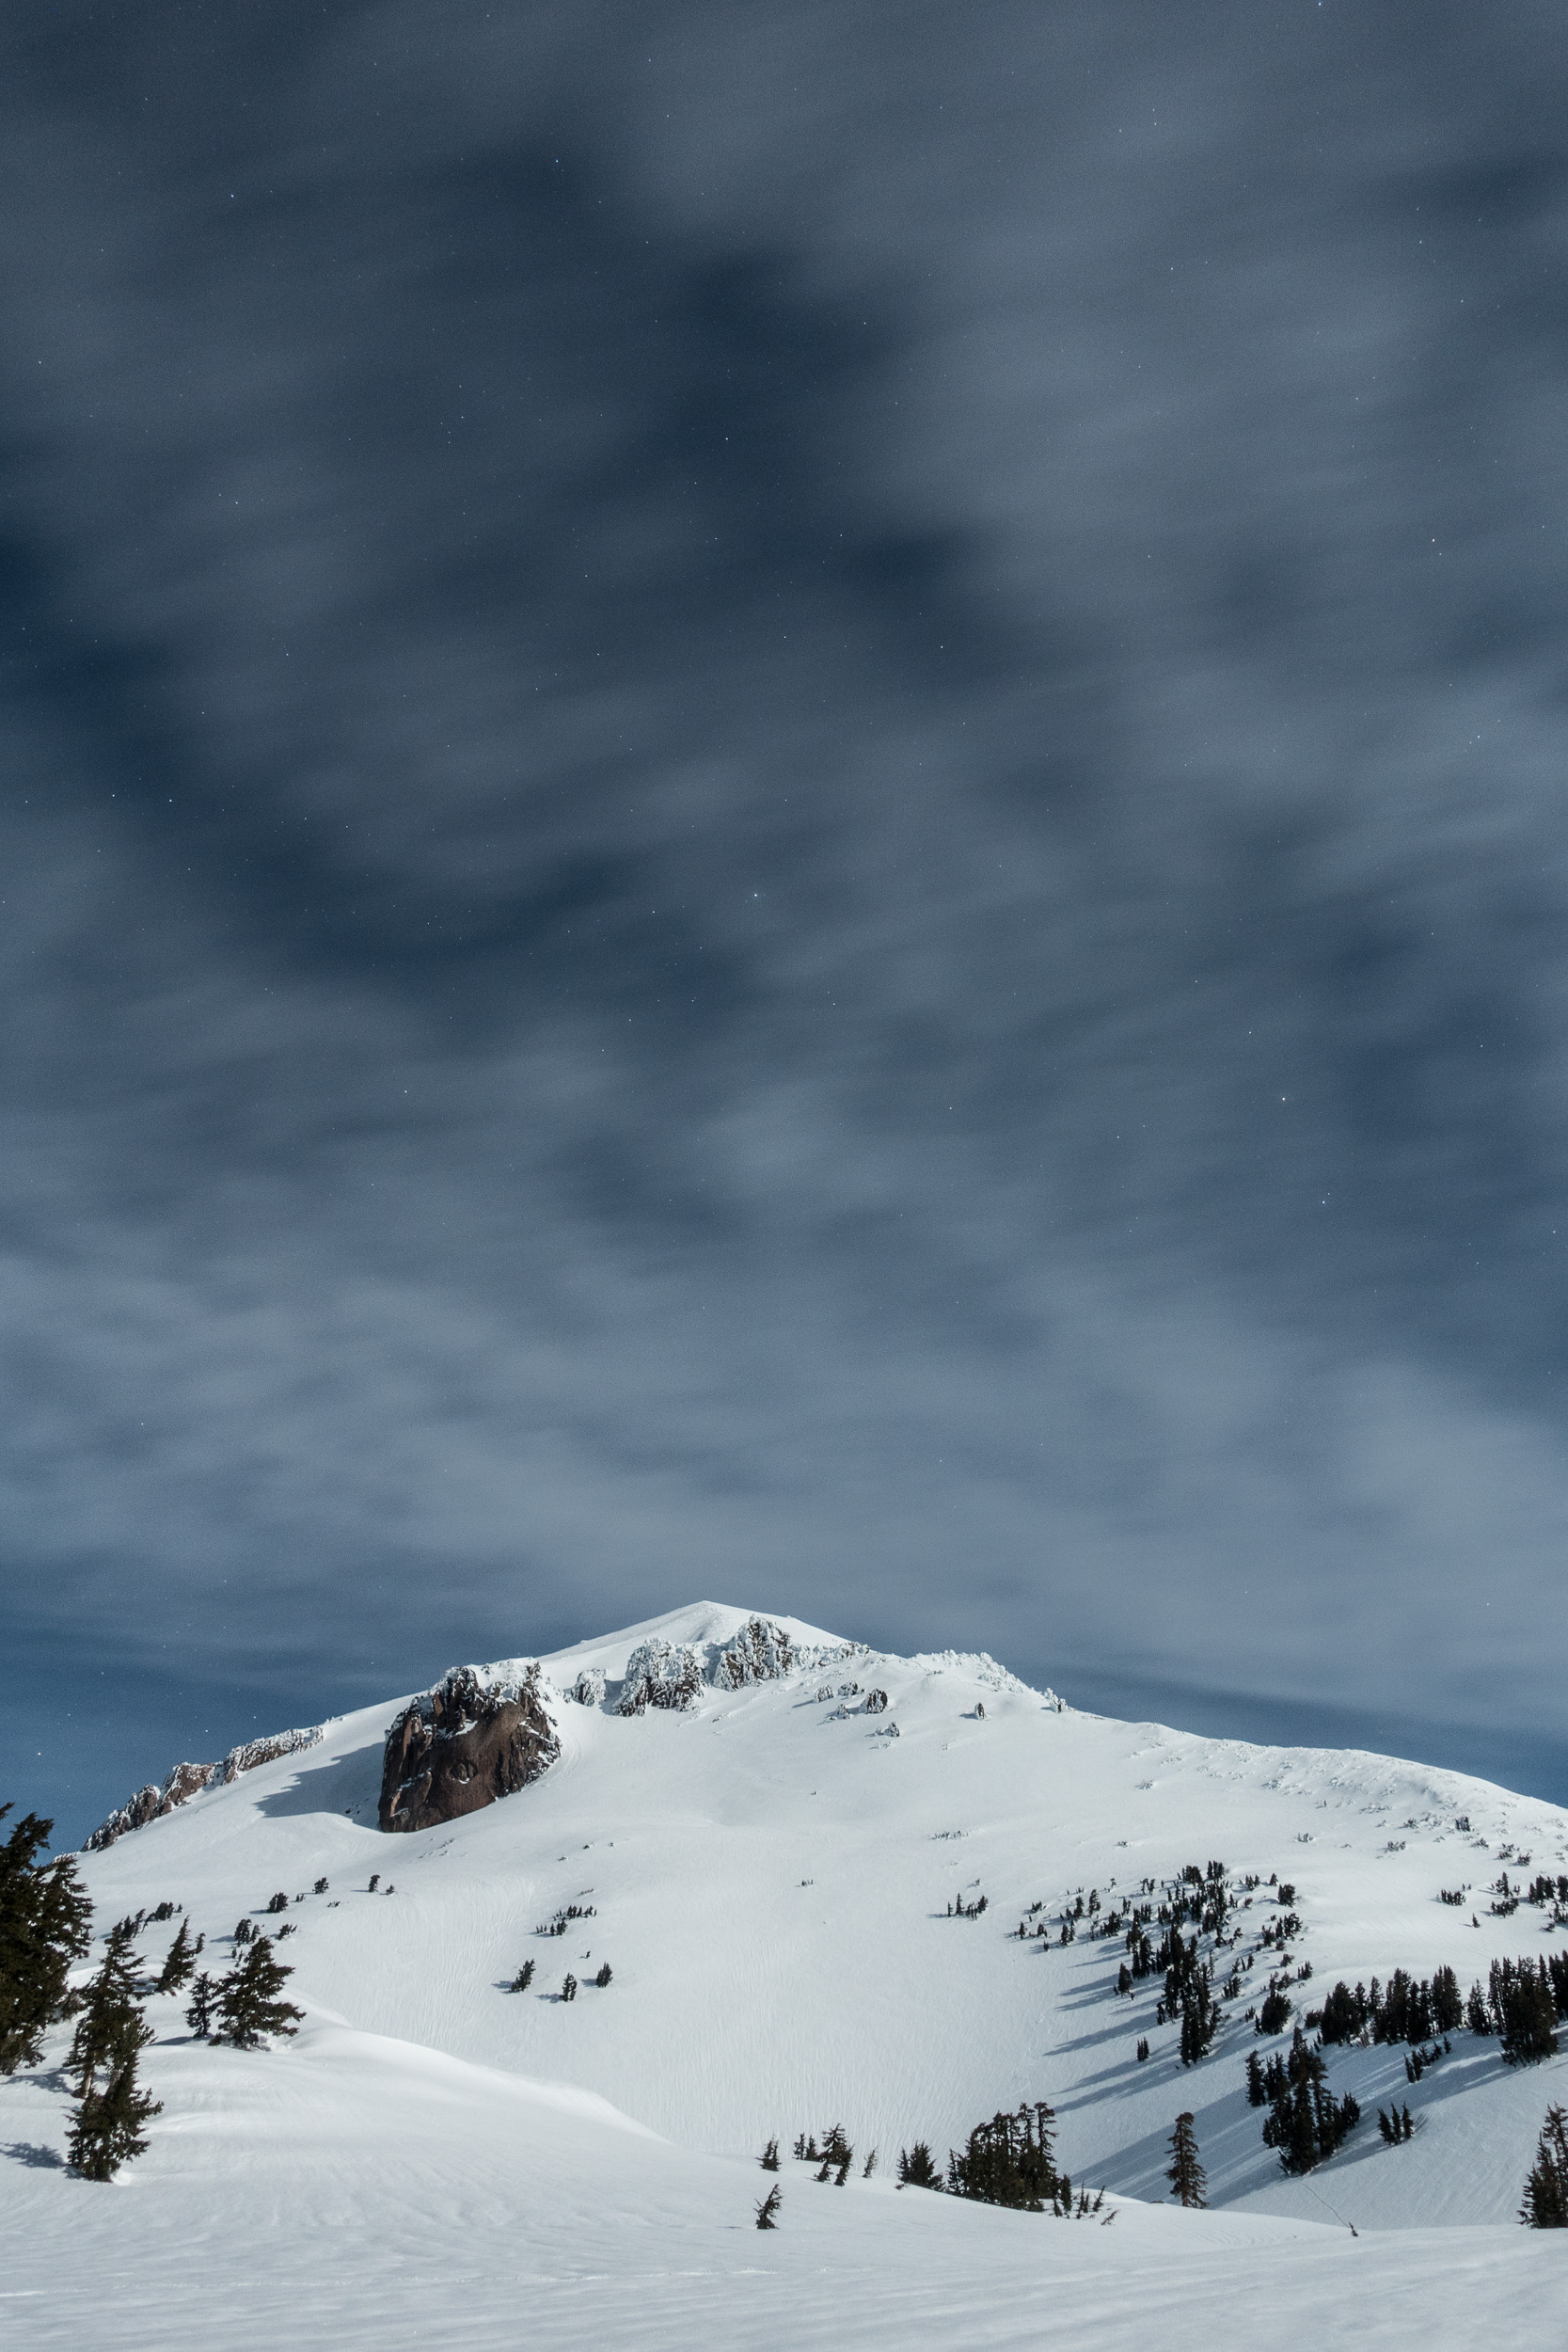  Lassen Peak in the winter, taken from camp the night before my summit. The summit block is the icy peak cresting above the right shoulder. Lassen Volcanic National Park, California.&nbsp; 